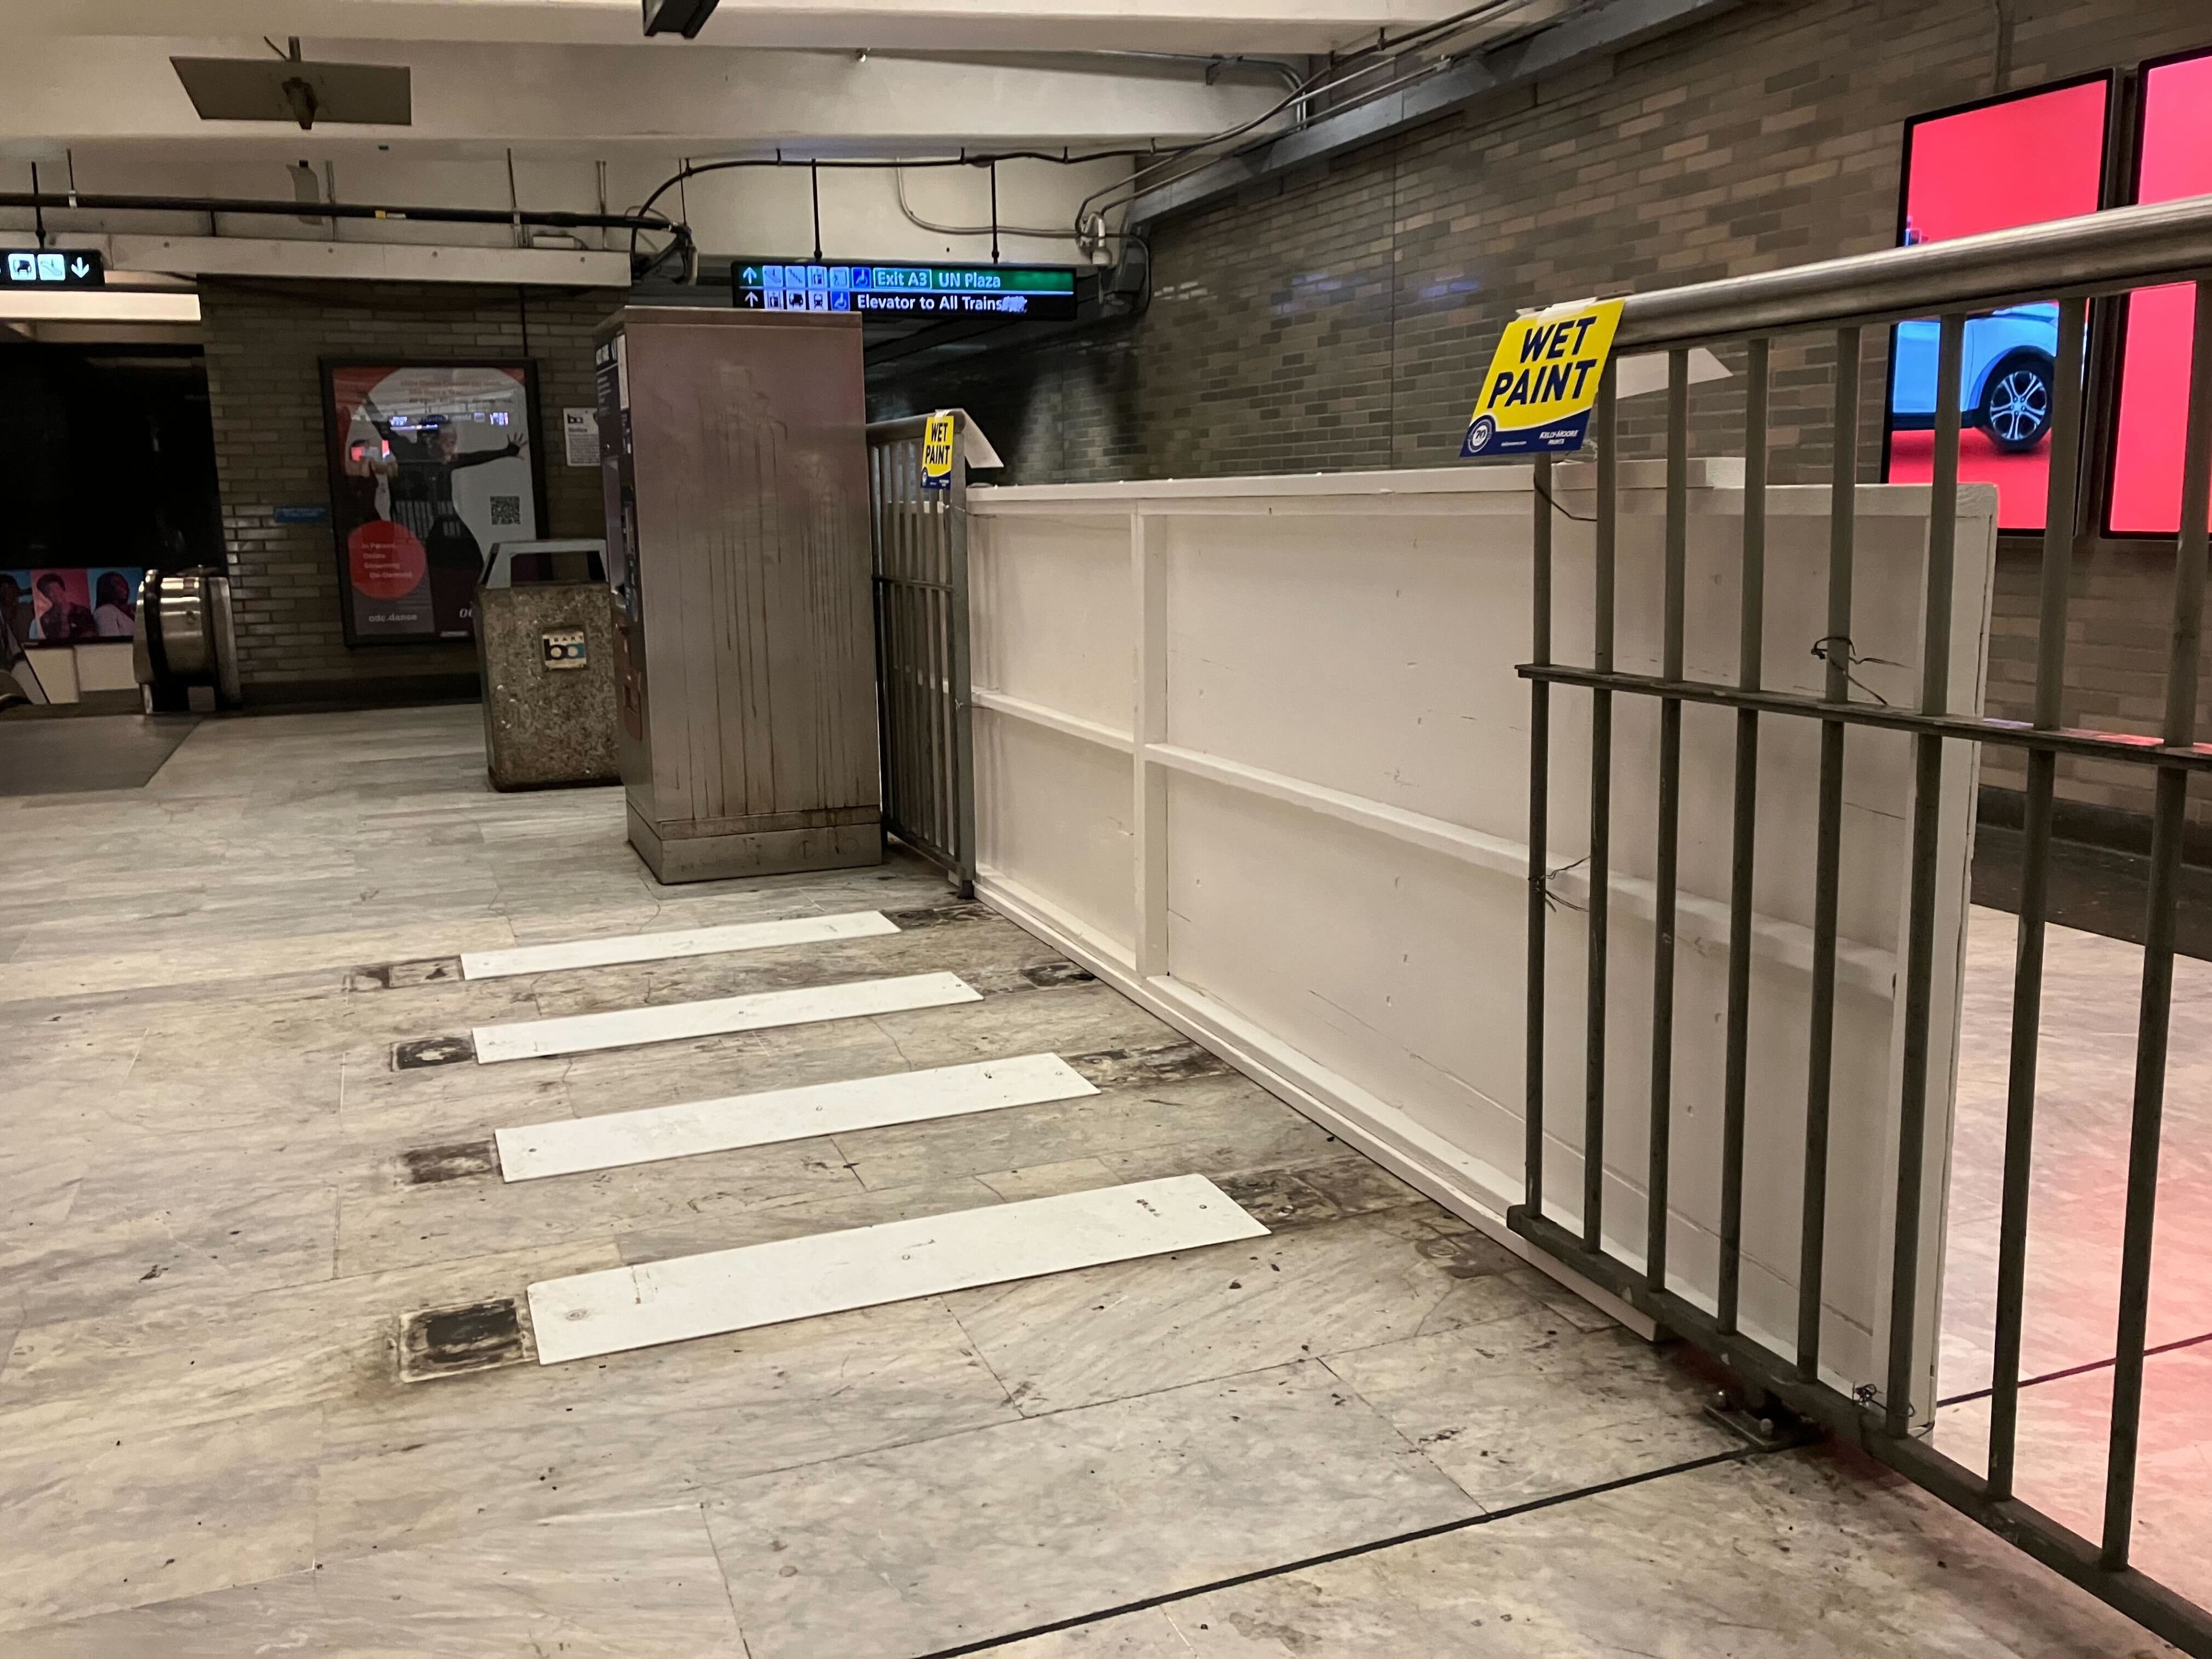 Downtown San Francisco BART Fare Gates Removed After Vandalism